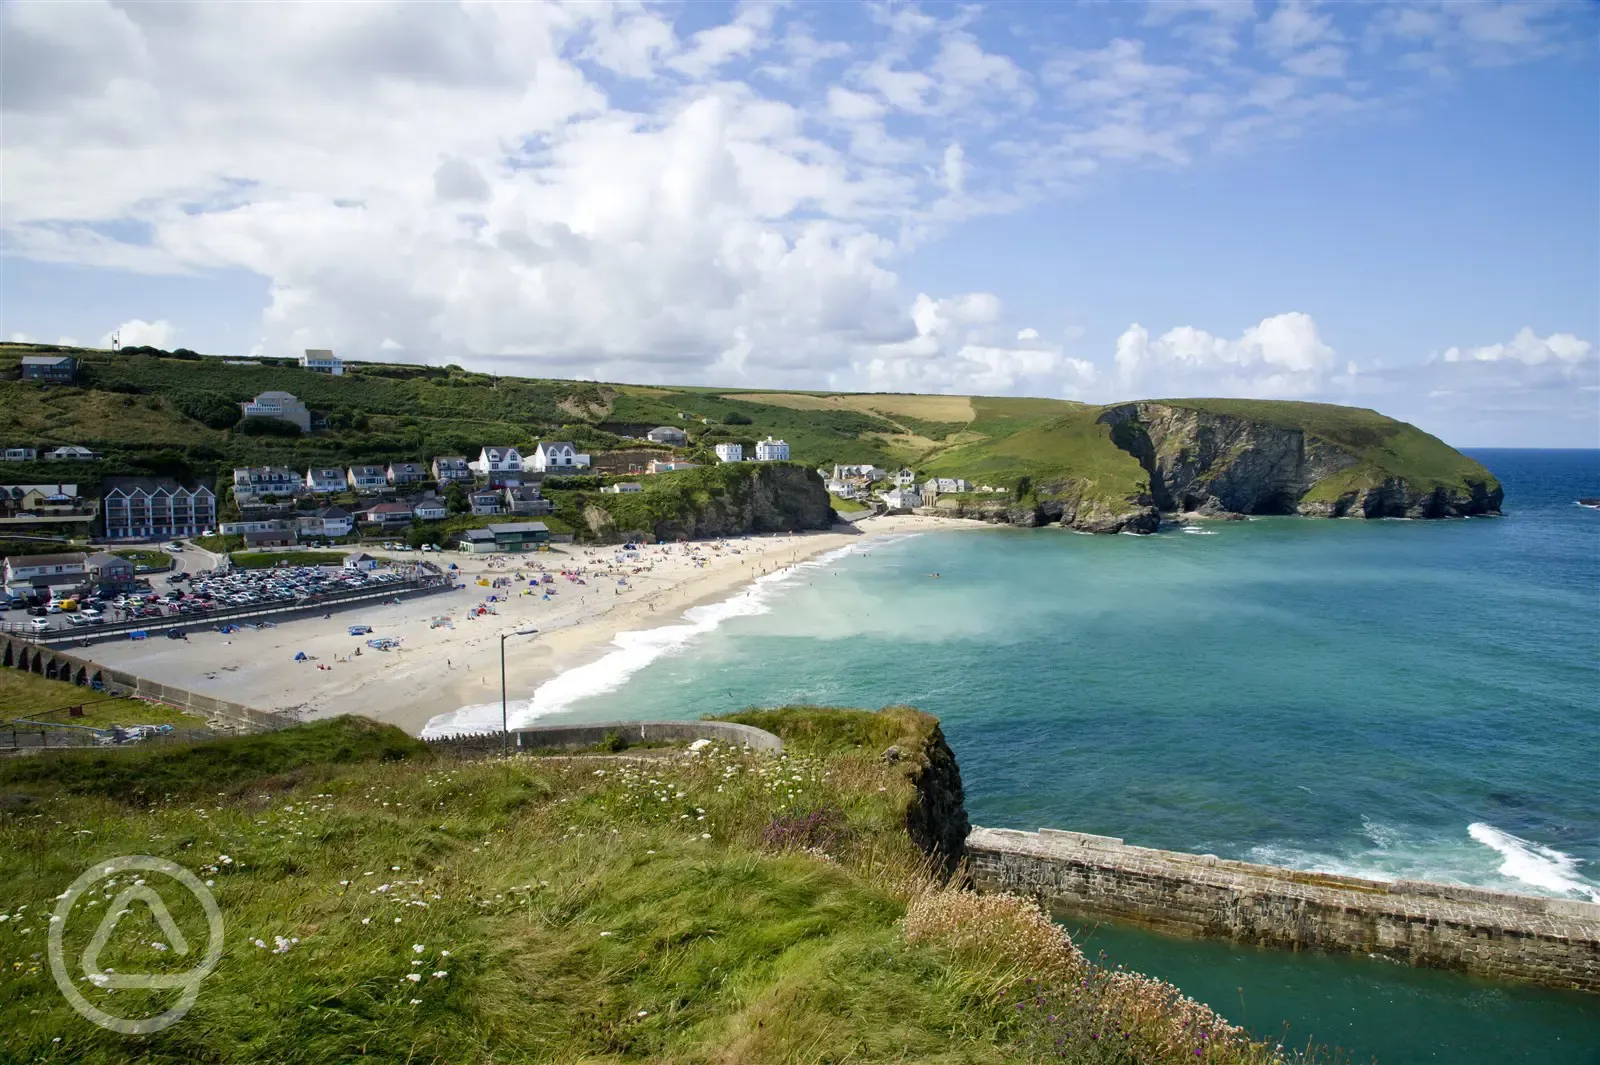 View of Portreath from the Coastal Path